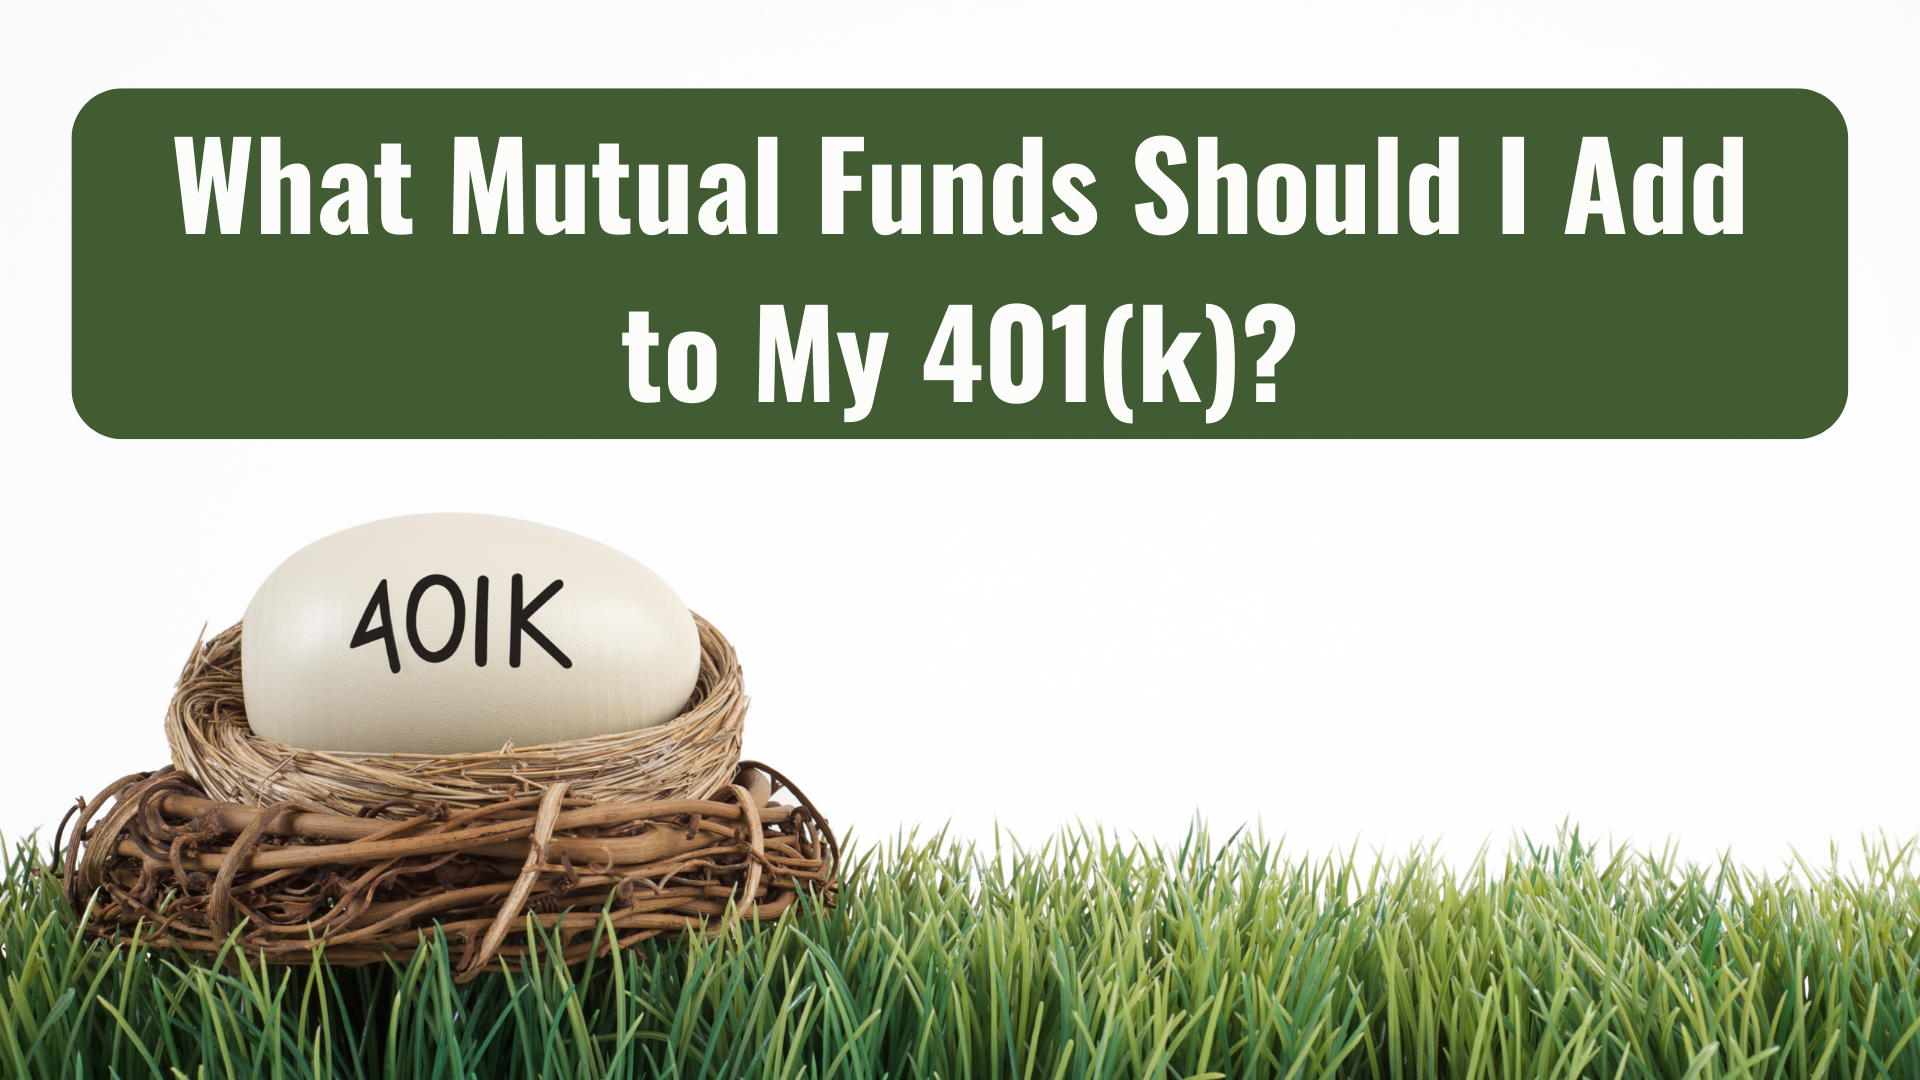 What Mutual Funds Should I Add to My 401(k)?